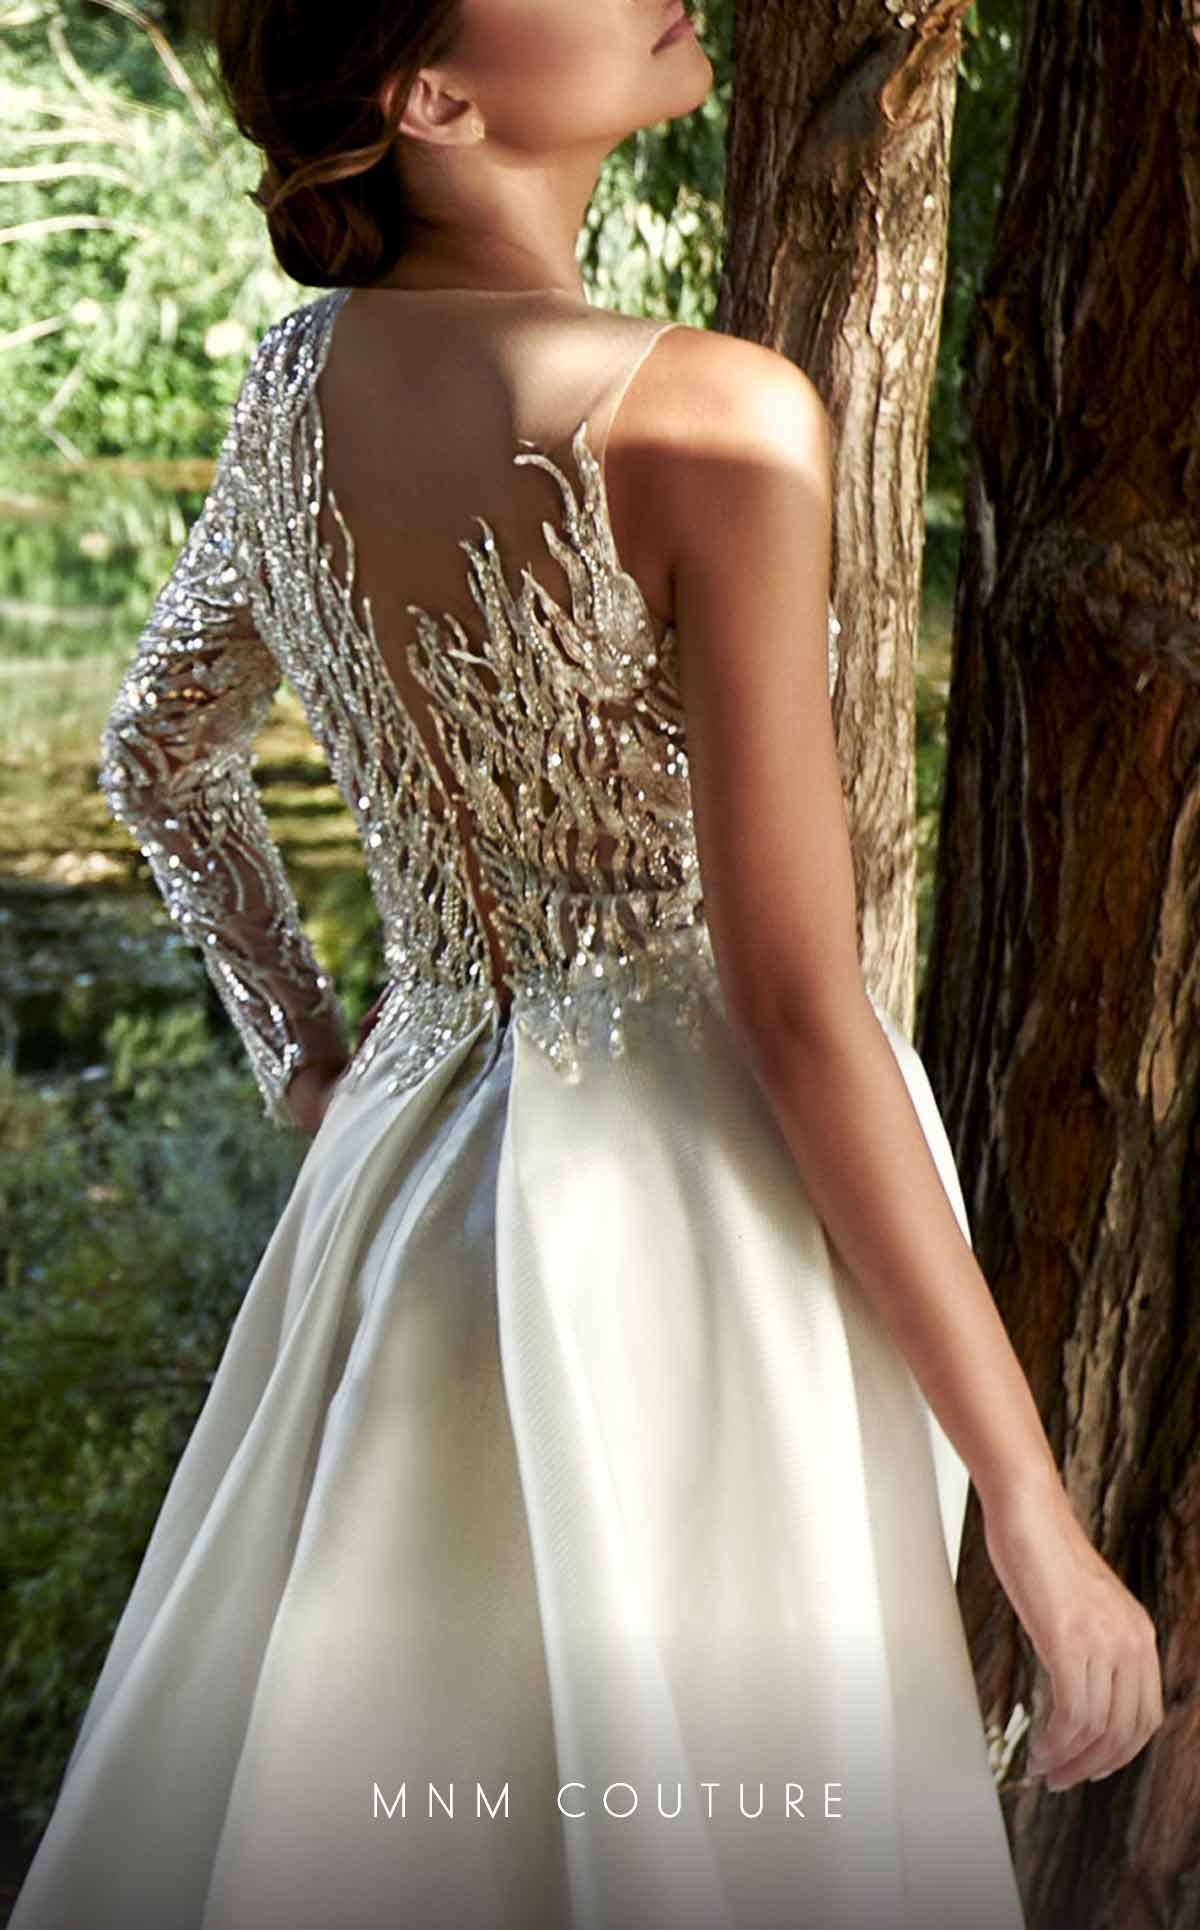 This MNM Couture style is insanely stunning. The flattering beading pattern, one sleeve design and overskirt is sure to compliment your shape in all the right ways